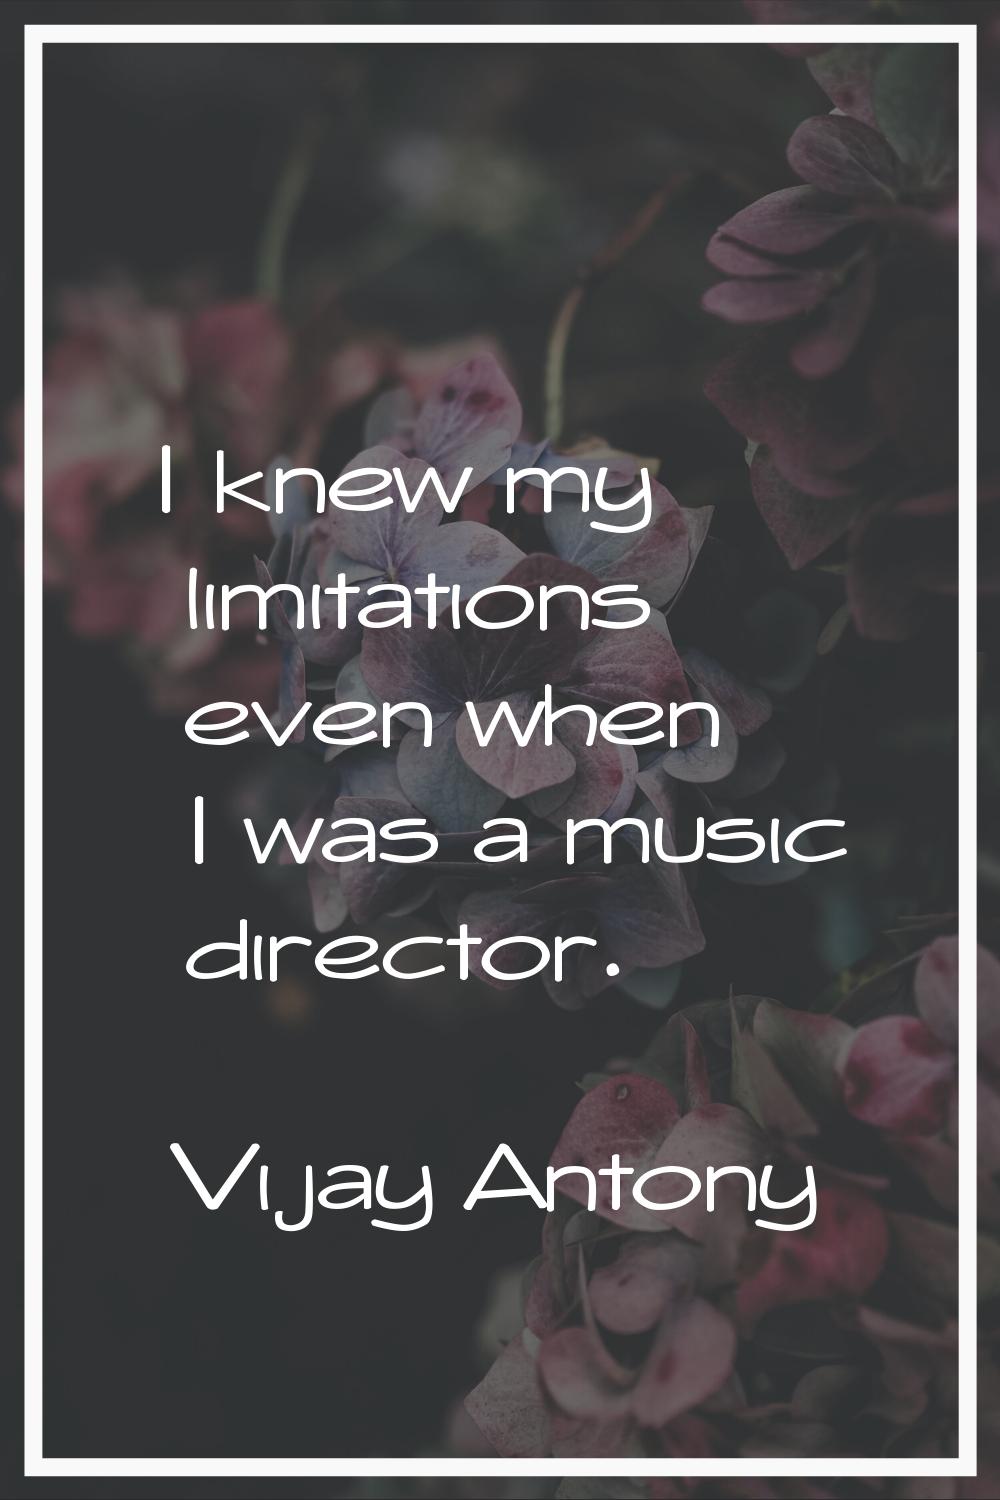 I knew my limitations even when I was a music director.